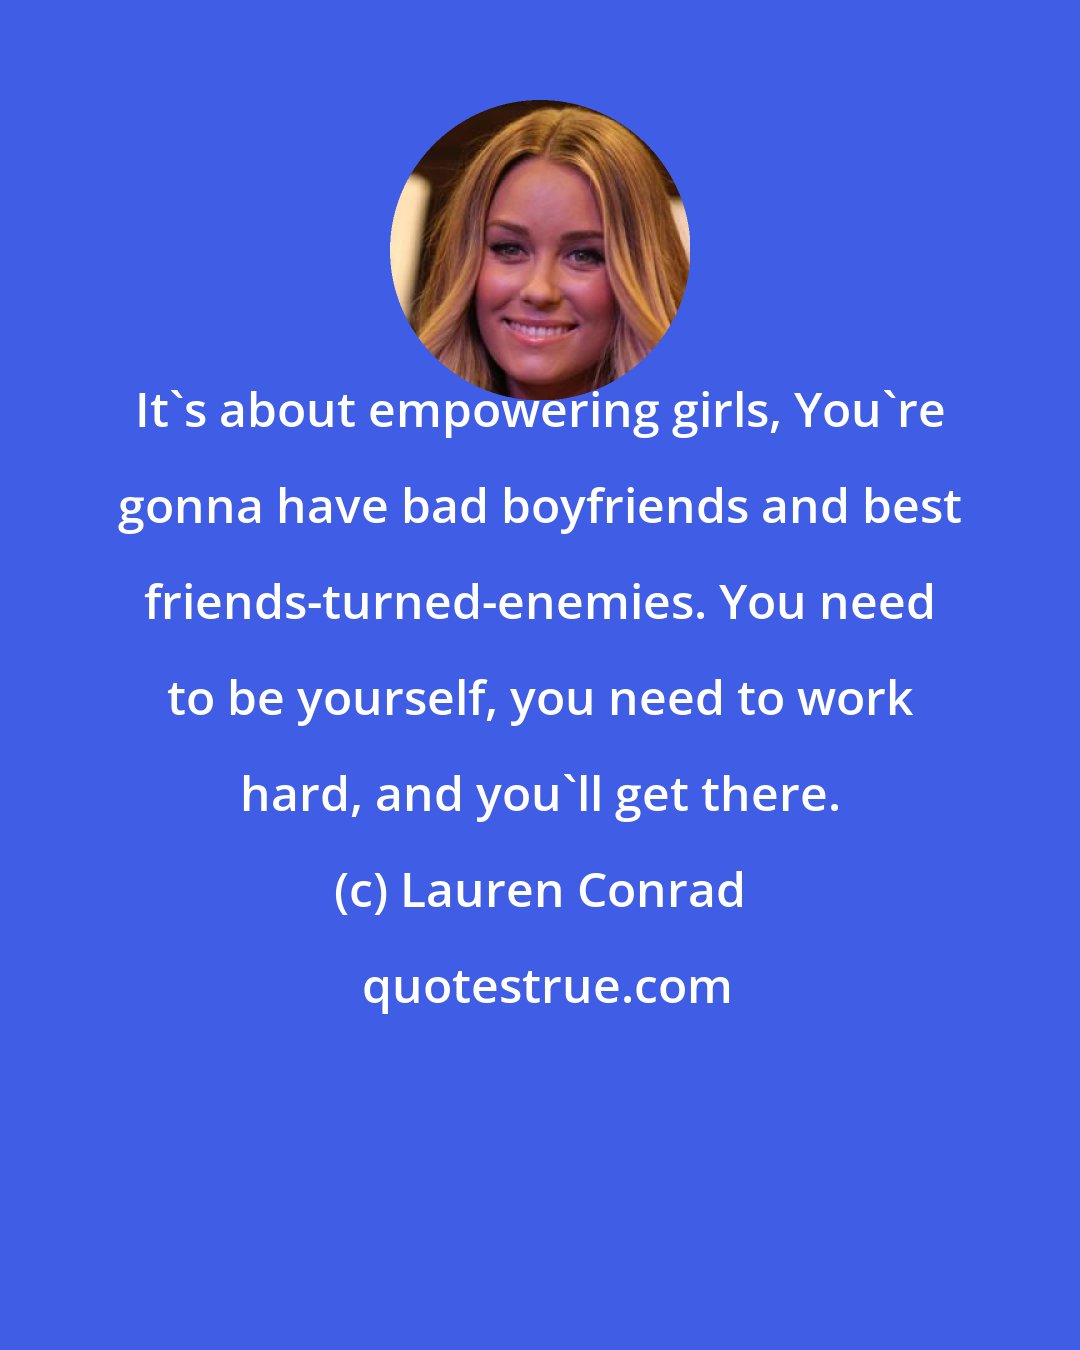 Lauren Conrad: It's about empowering girls, You're gonna have bad boyfriends and best friends-turned-enemies. You need to be yourself, you need to work hard, and you'll get there.